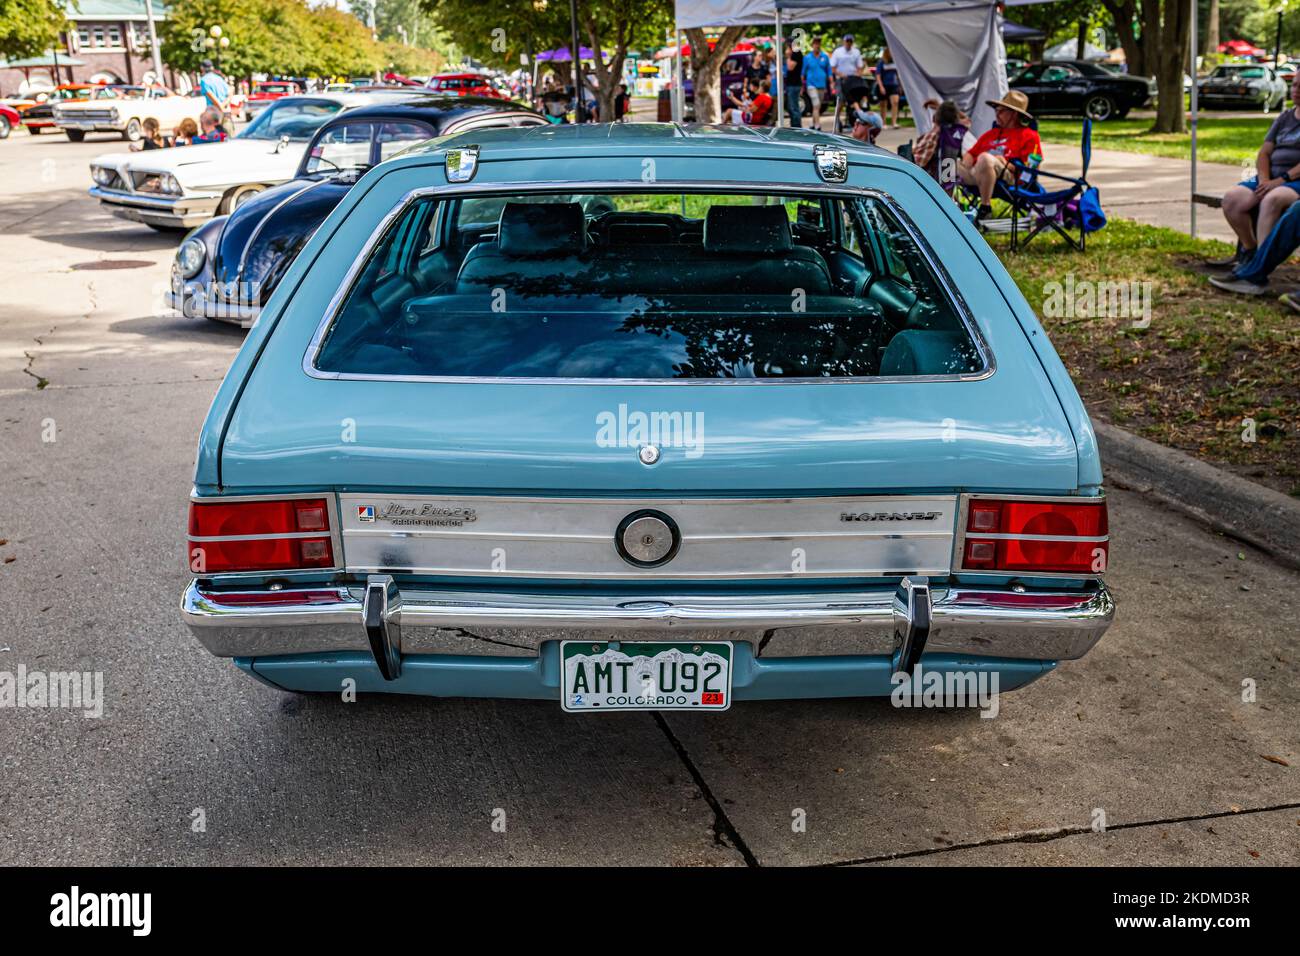 Des Moines, IA - July 01, 2022: High perspective rear view of a 1971 AMC Hornet Sportabout Wagon at a local car show. Stock Photo